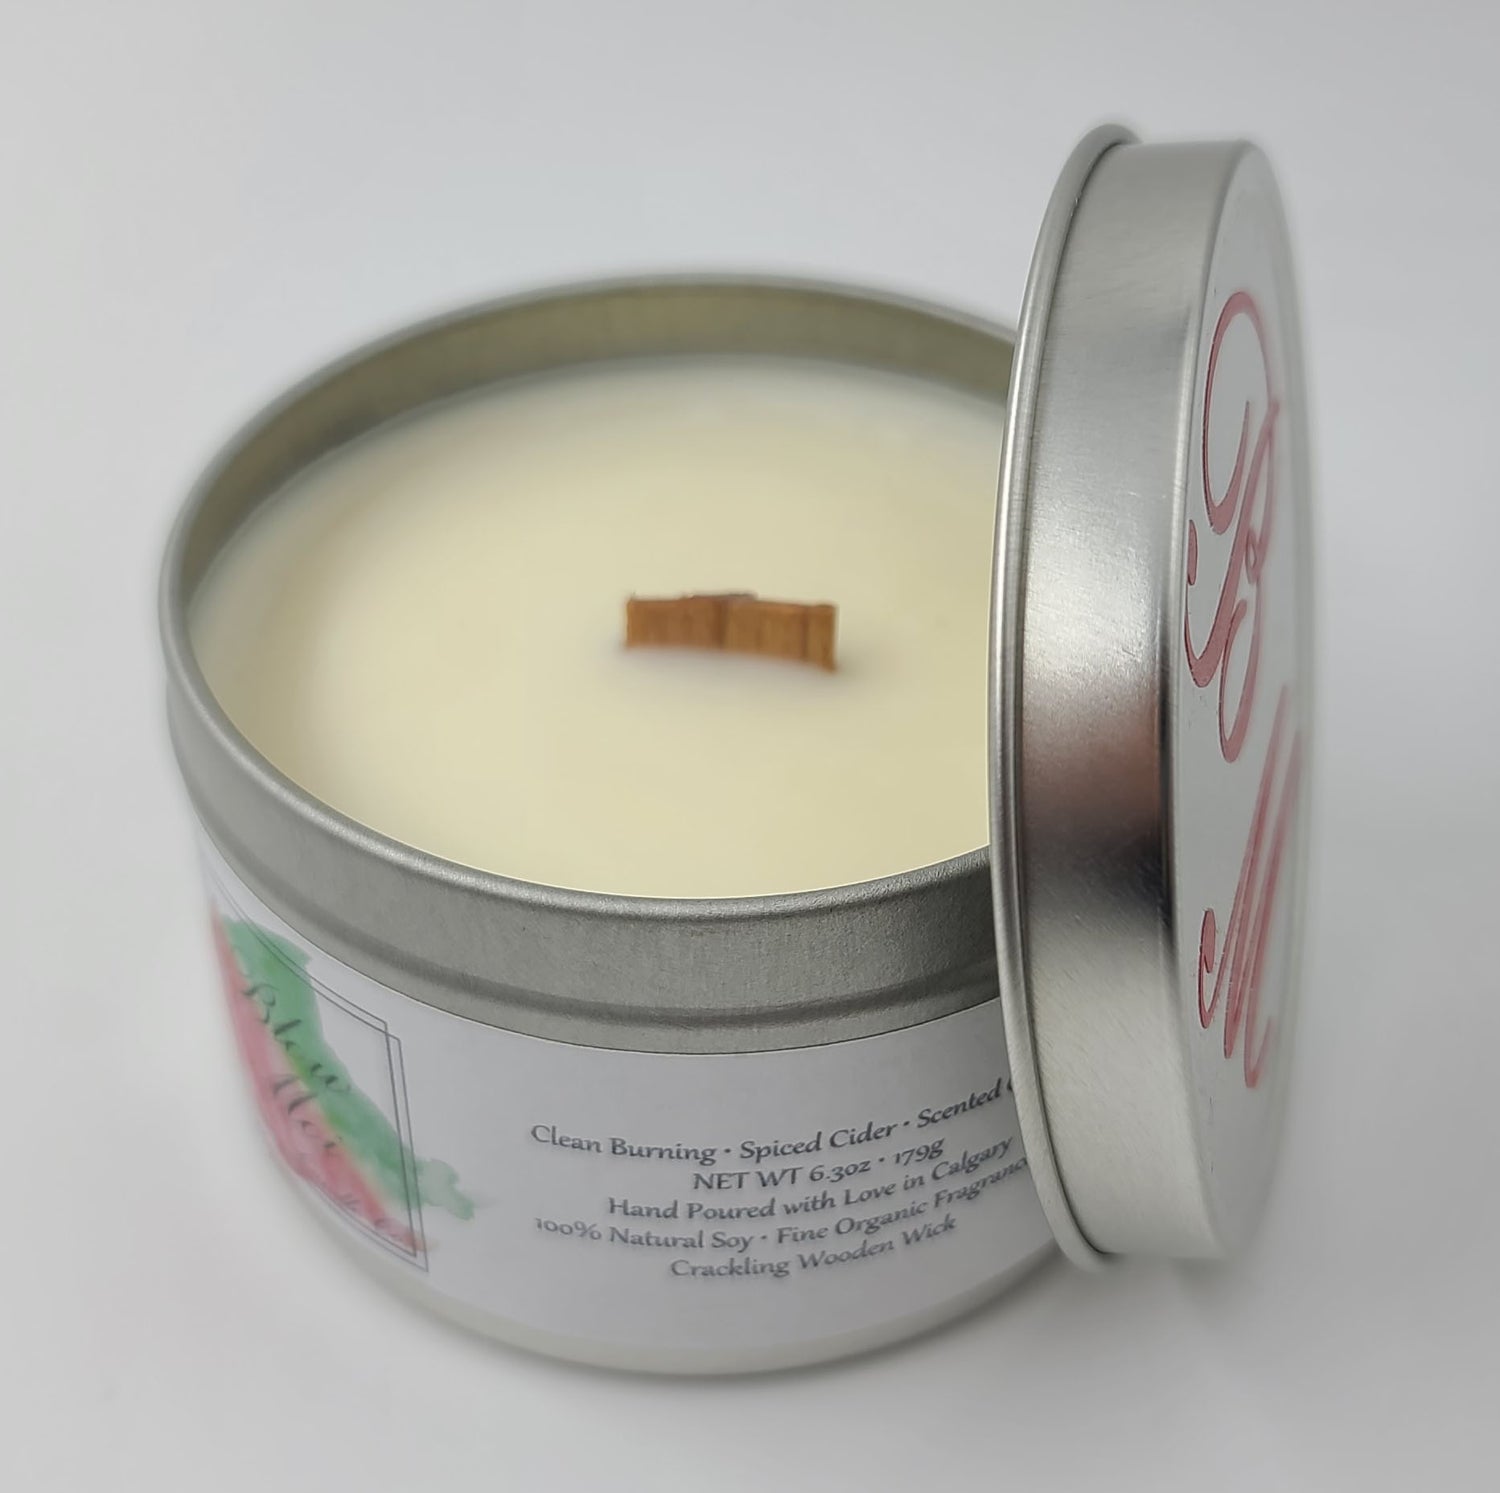 Silver Metal Tin - 8oz - Scented Candle - Crackling Wooden Wick